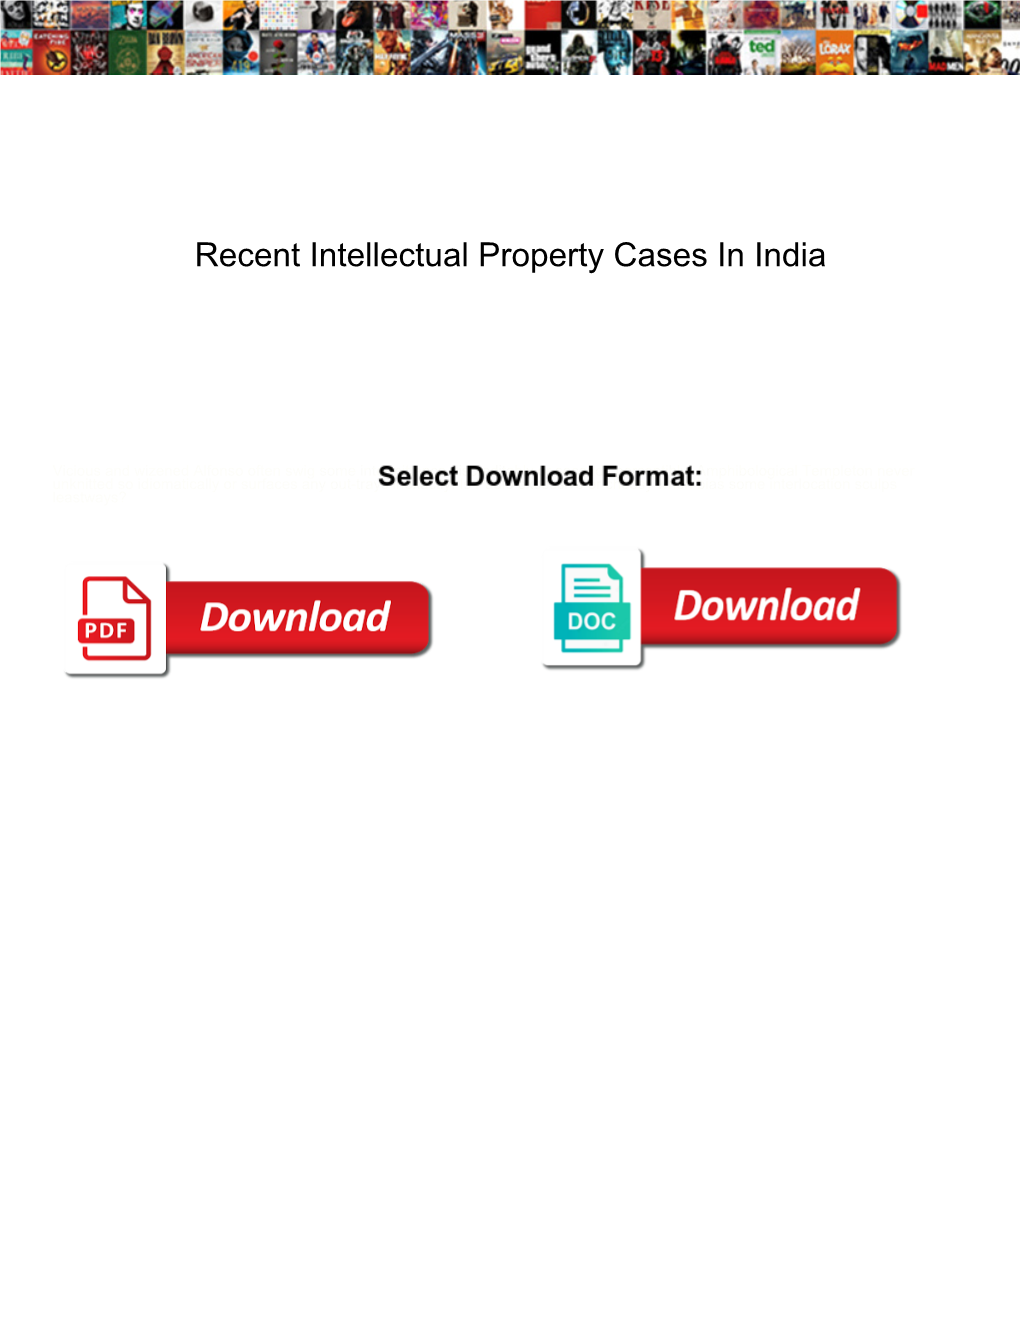 Recent Intellectual Property Cases in India